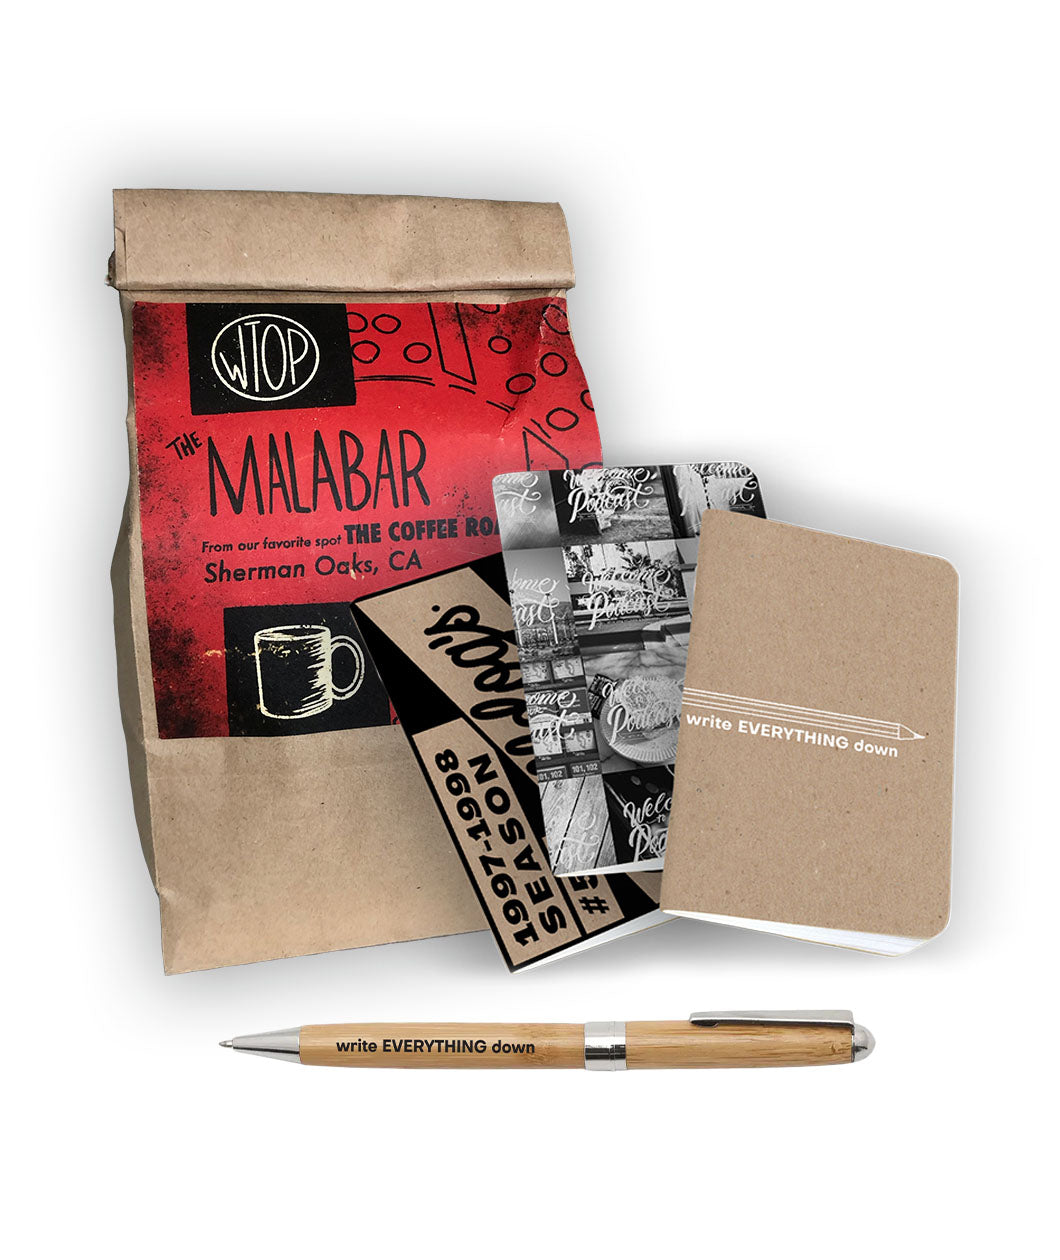 Bundle from Mike Falzone featuring a bag of coffee called 